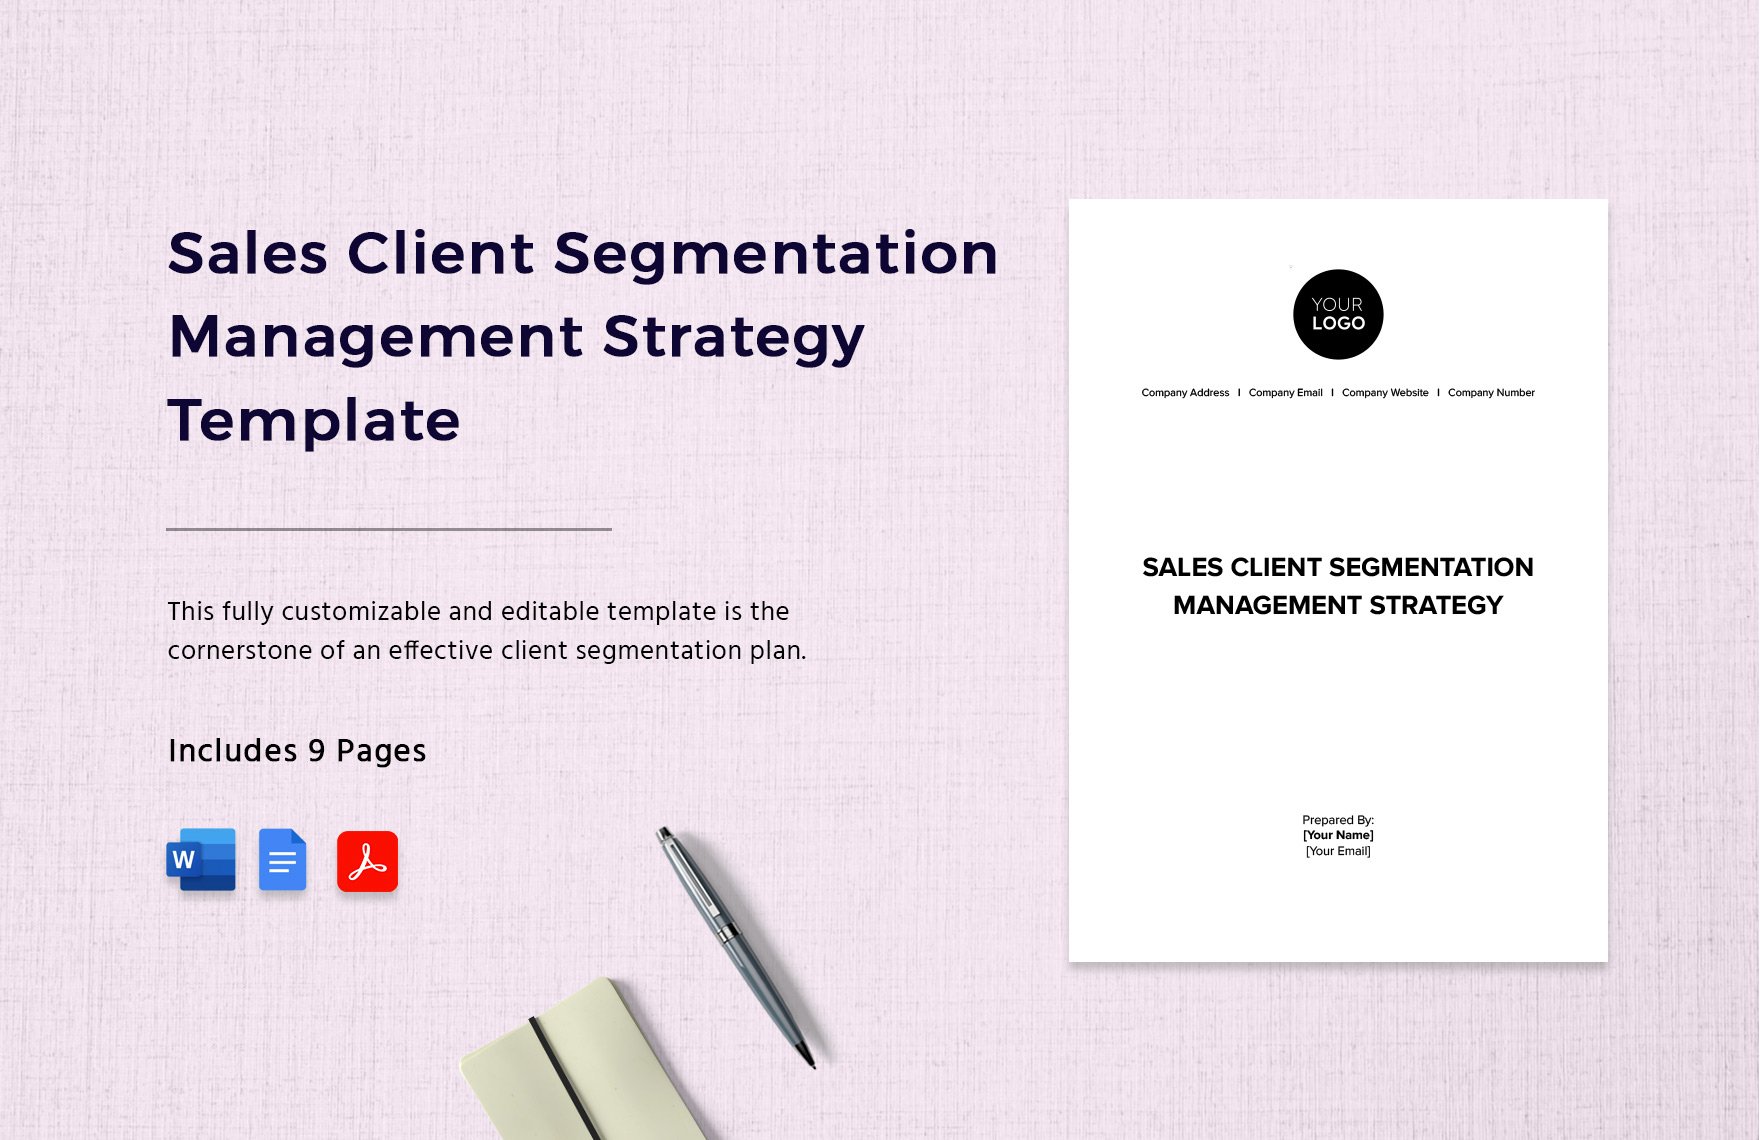 Sales Client Segmentation Management Strategy Template in Word, Google Docs, PDF